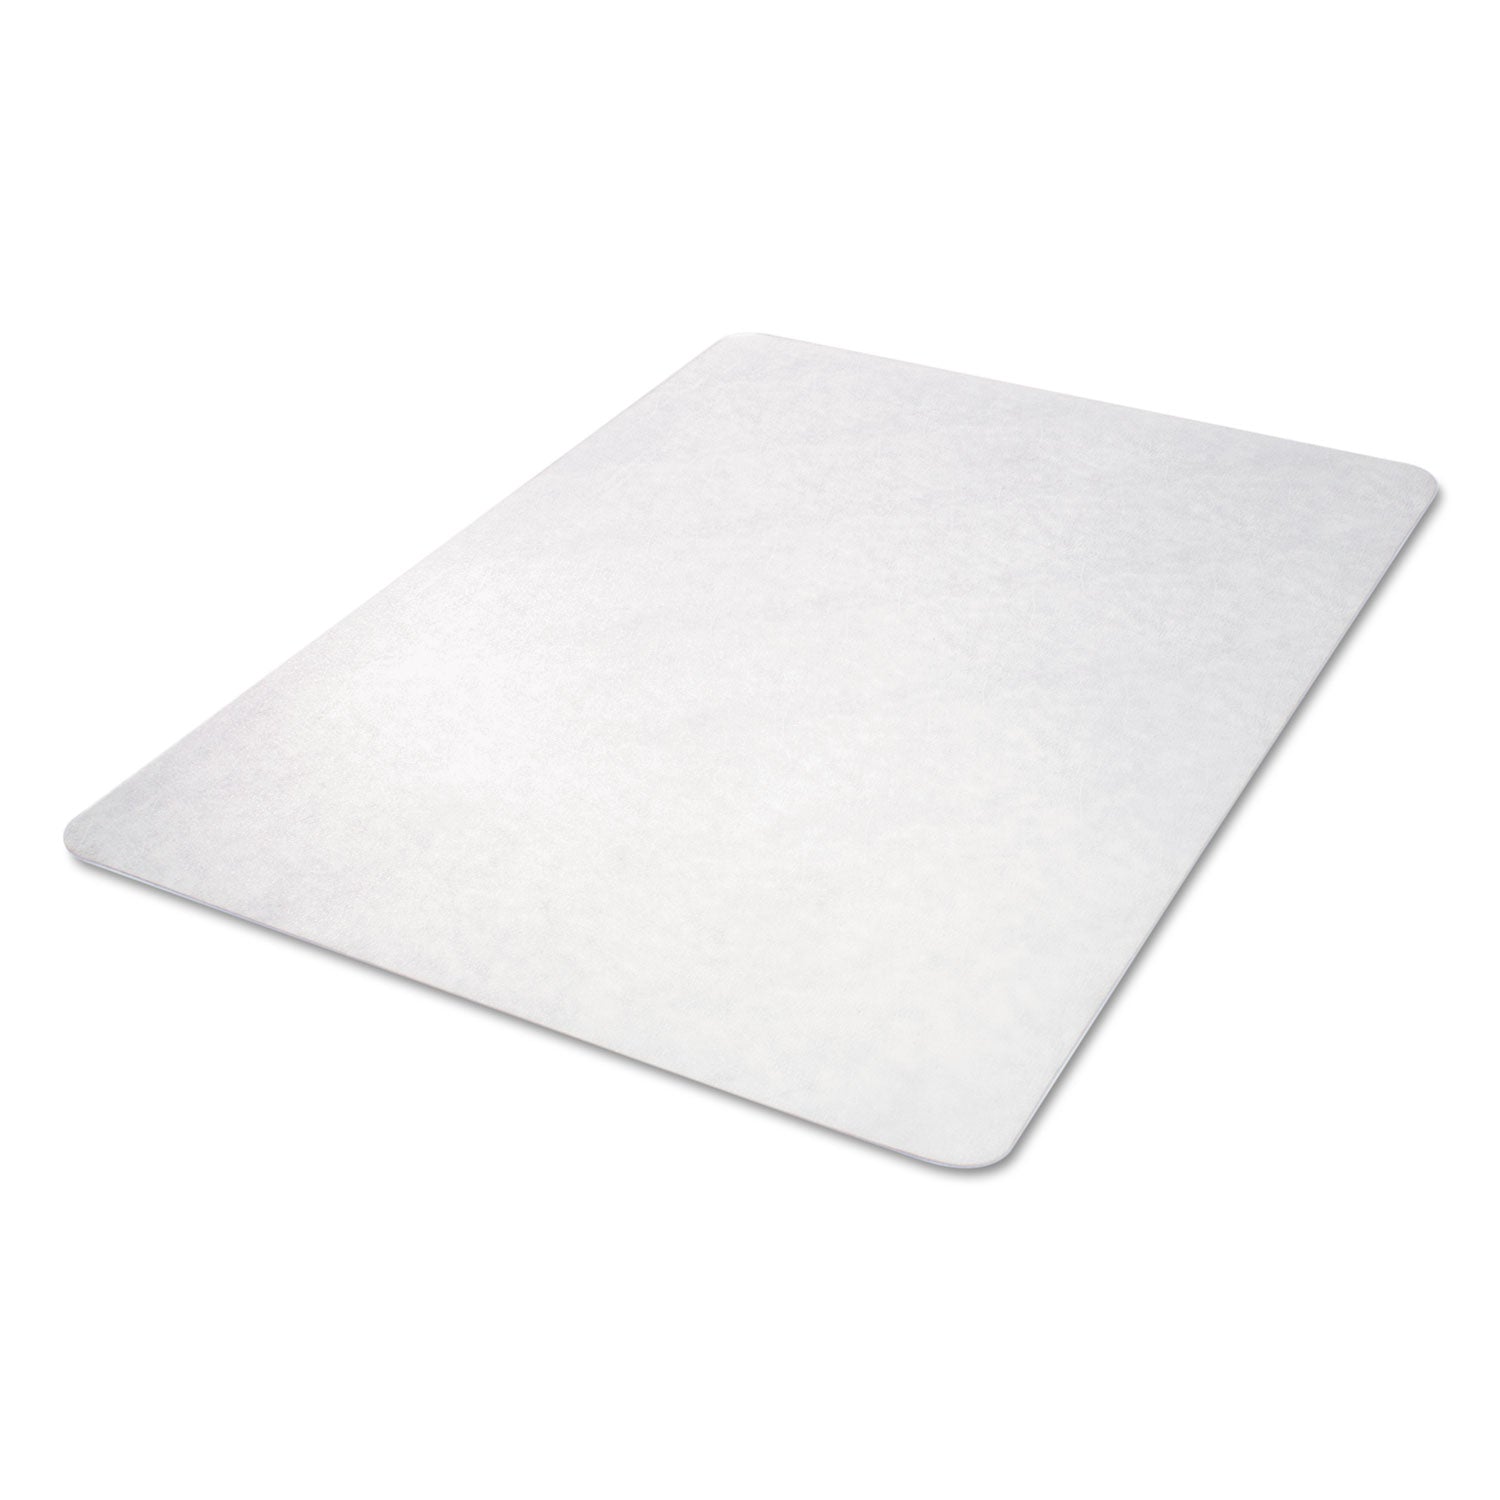 economat-all-day-use-chair-mat-for-hard-floors-rolled-packed-45-x-53-clear_defcm21242com - 8